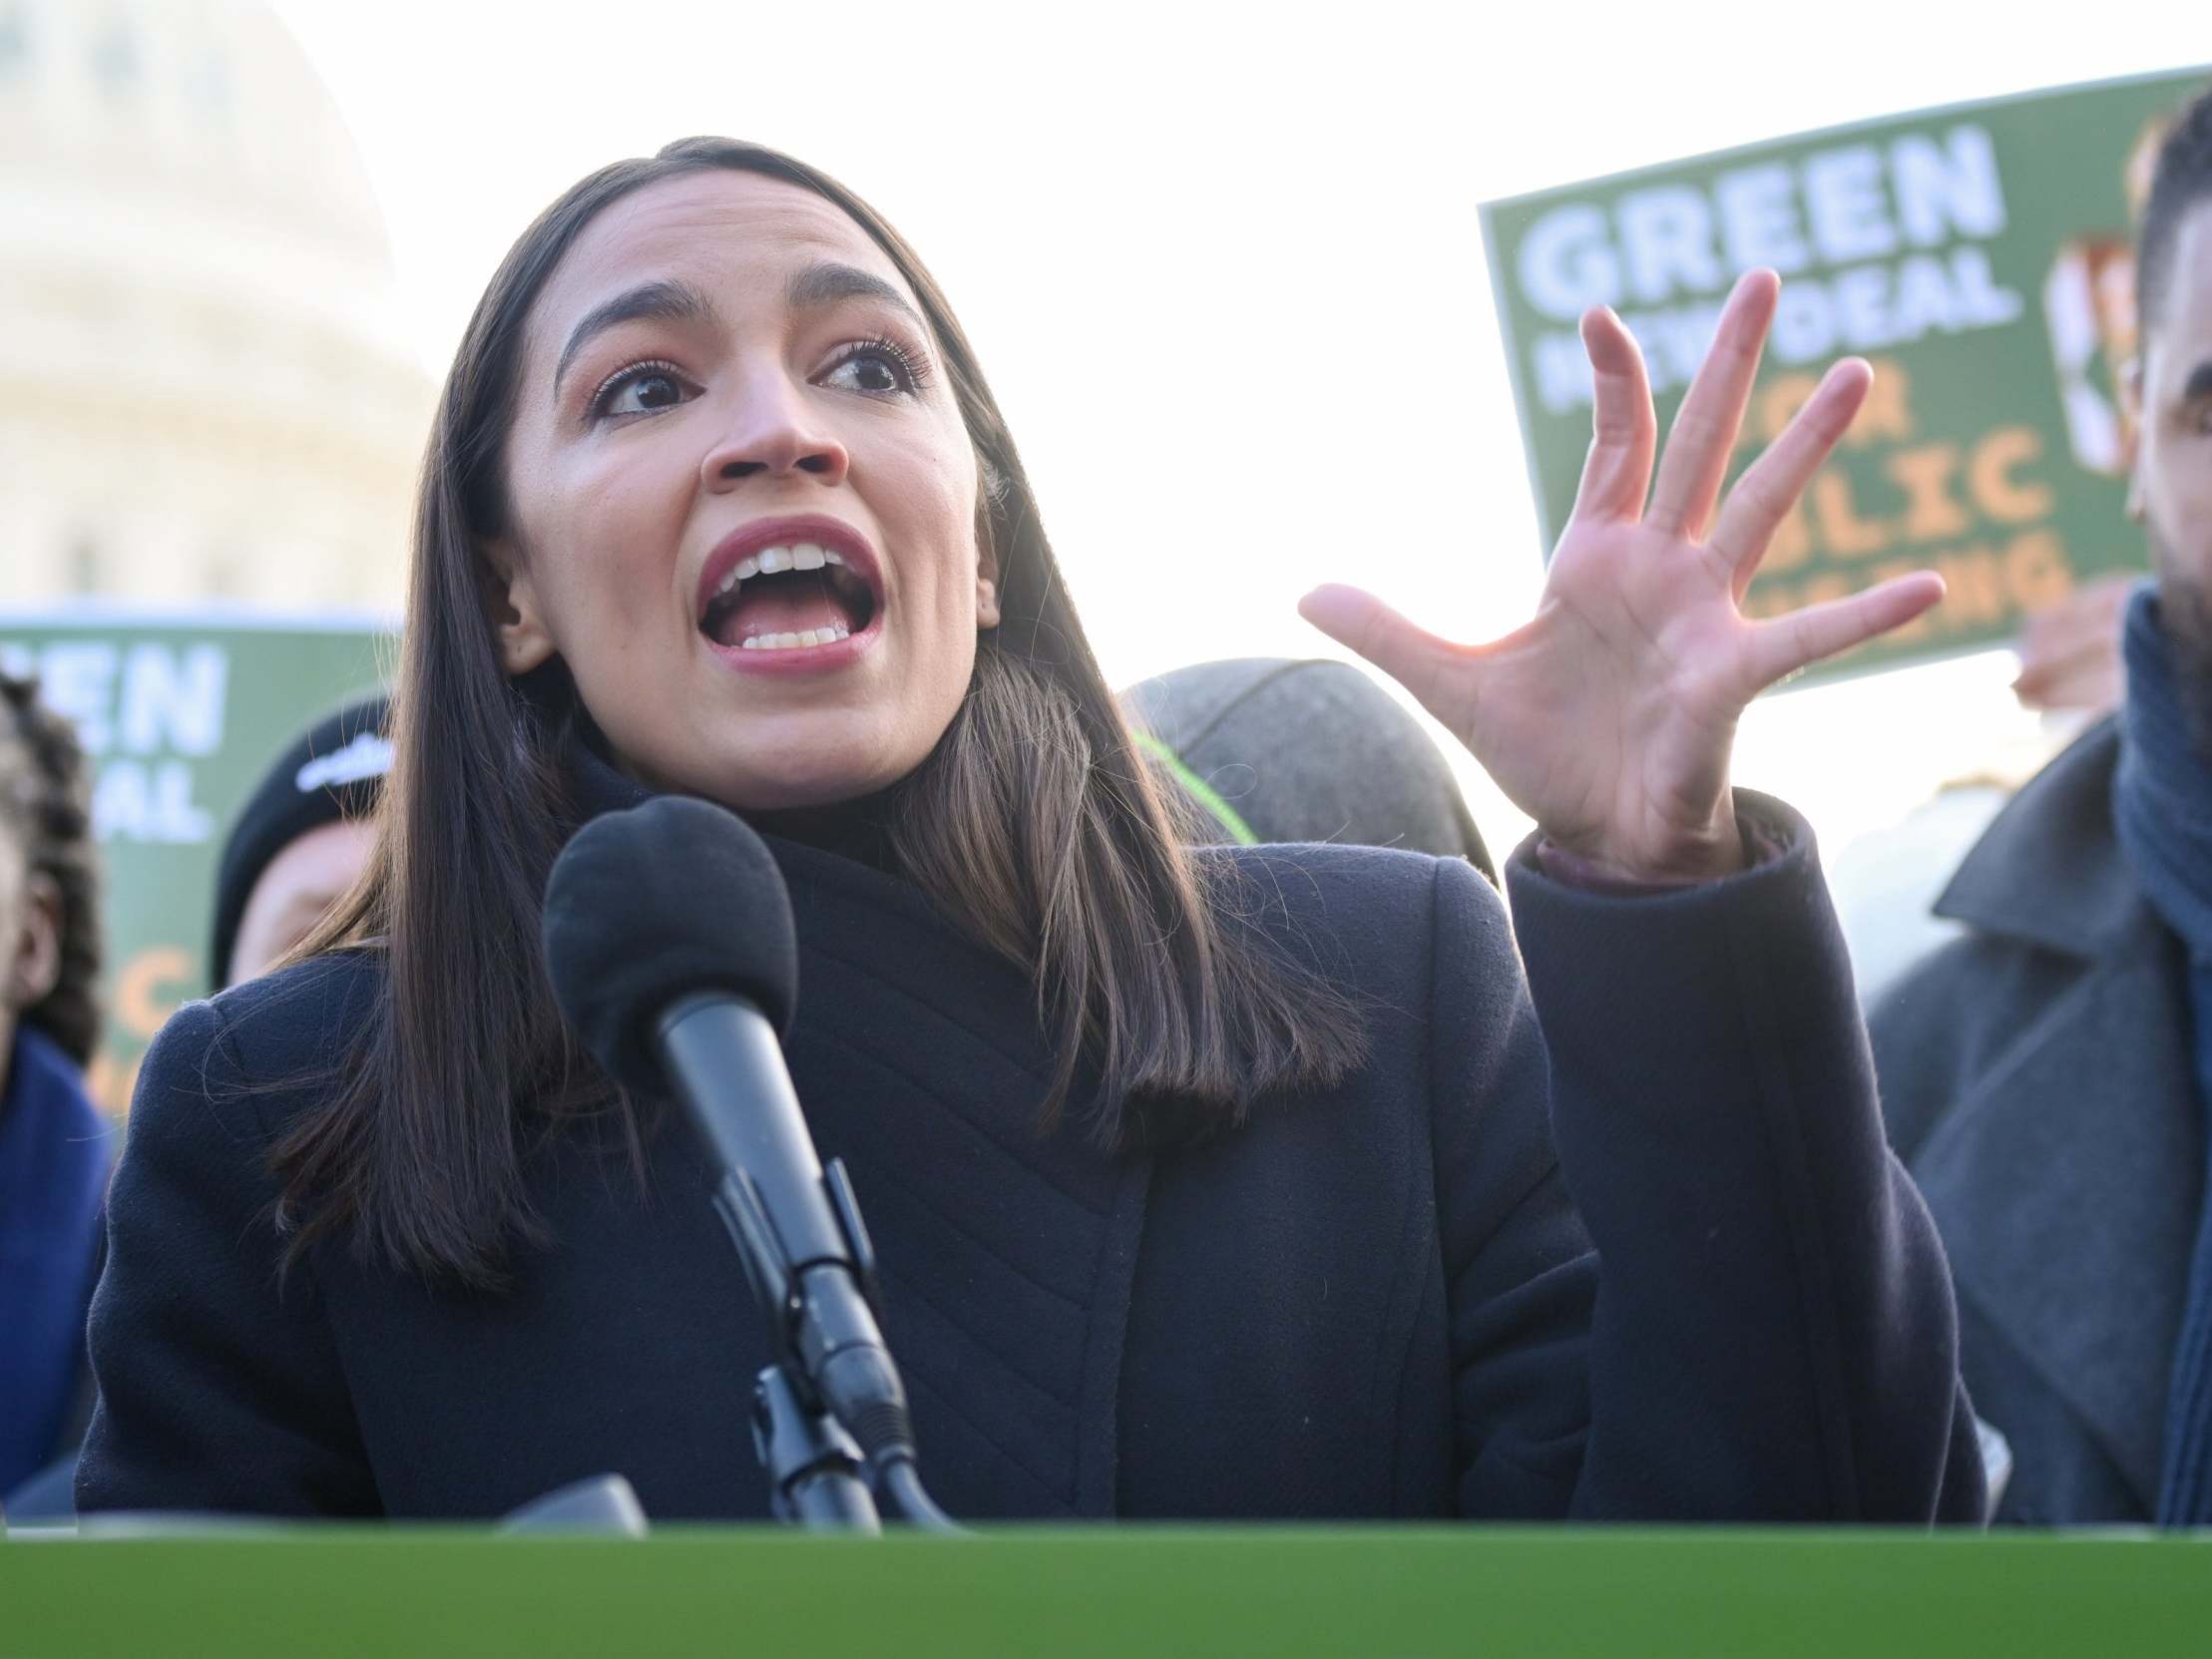 'Atrocious antisemitism': AOC attacks Trump for comments about Jewish people protecting money